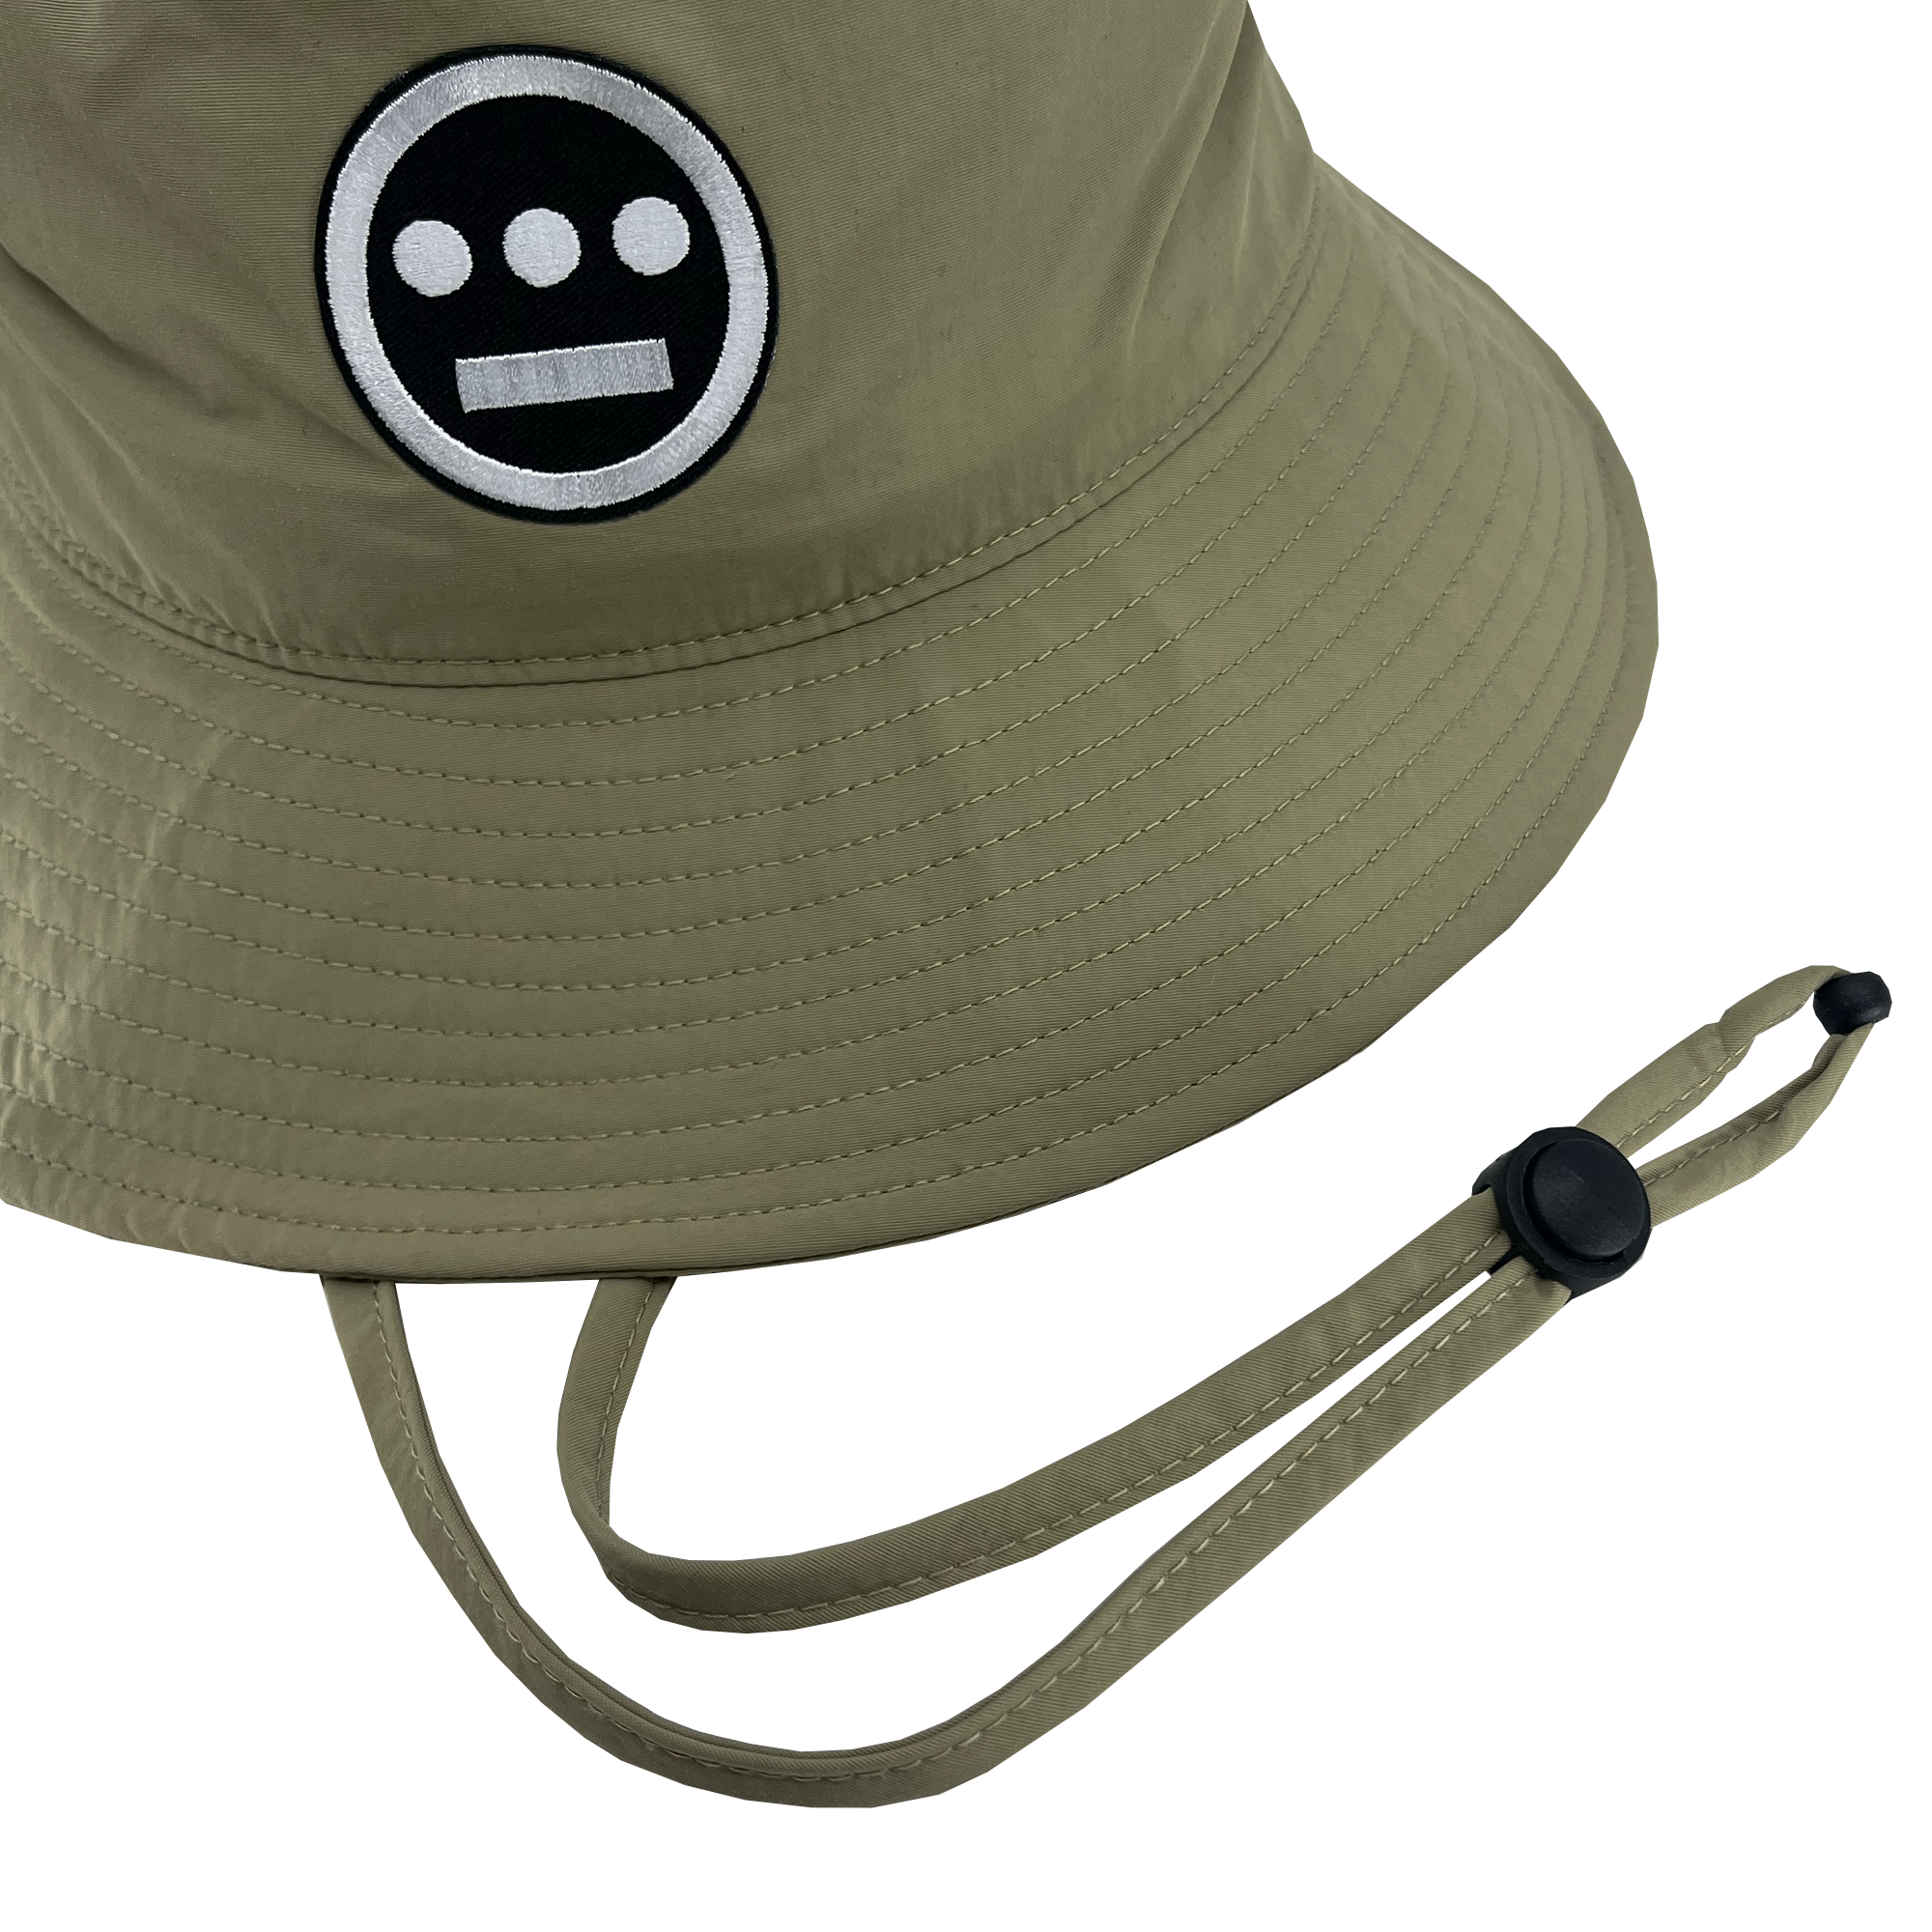 Detailed view of wide brim Khaki bucket hat with toggles and Hiero logo patch .